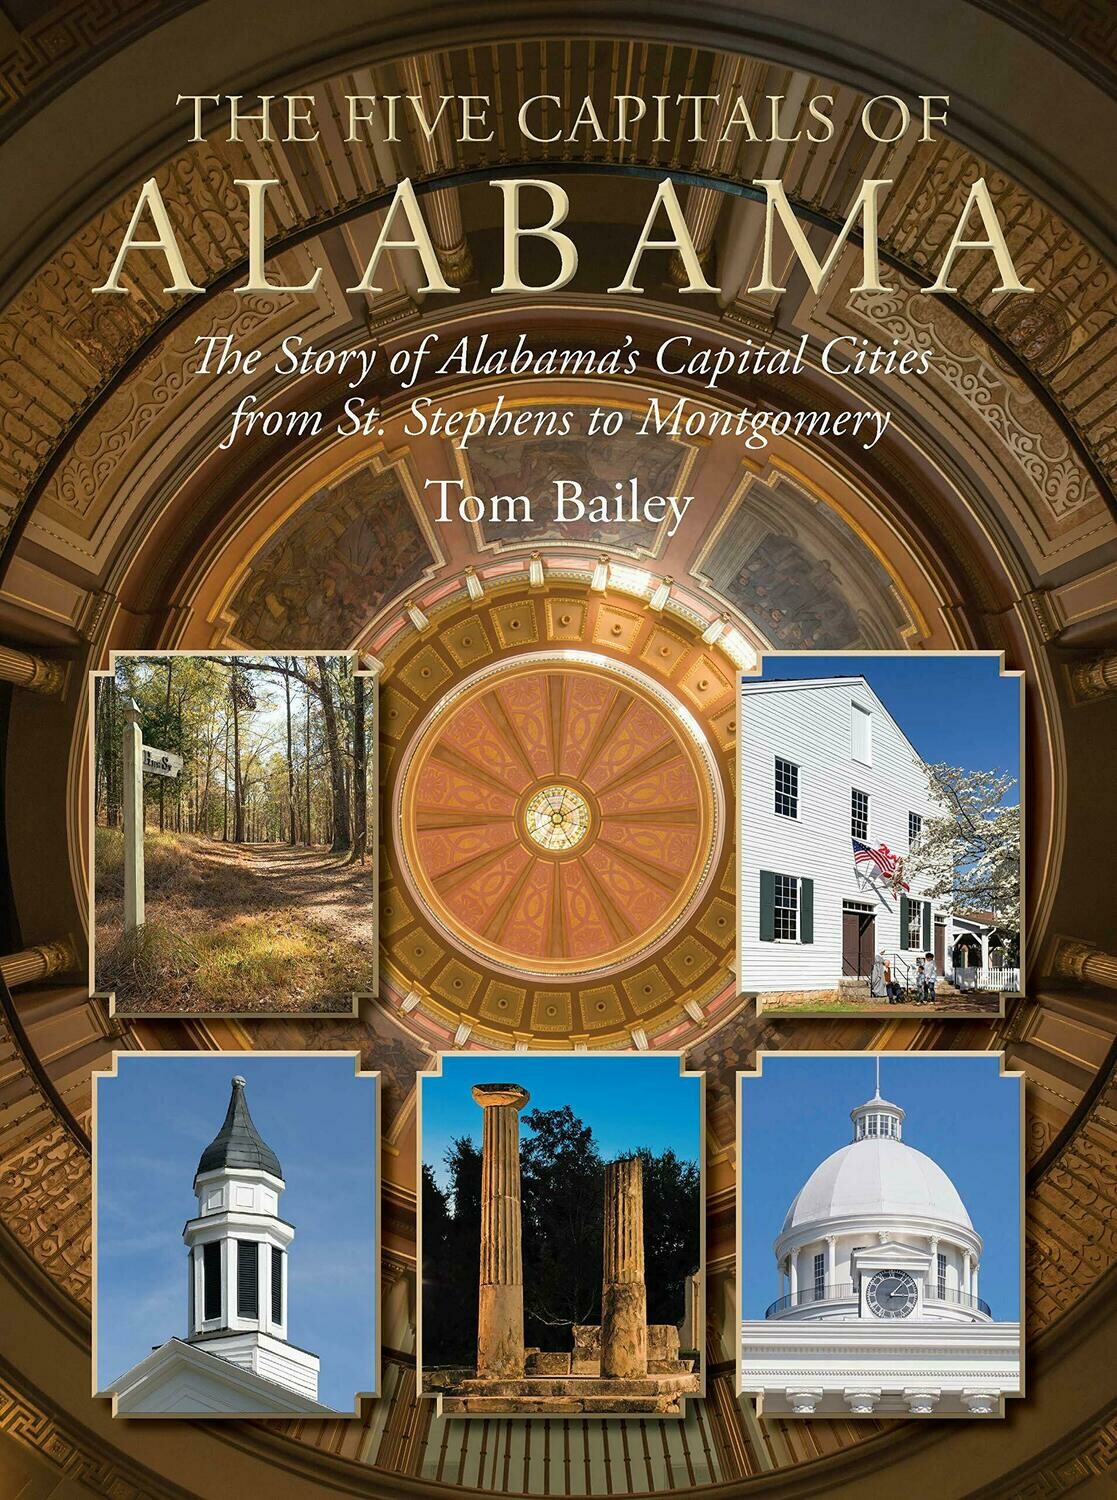 The Five Capitals of Alabama: The Story of Alabama's Capital Cities by Tom Bailey